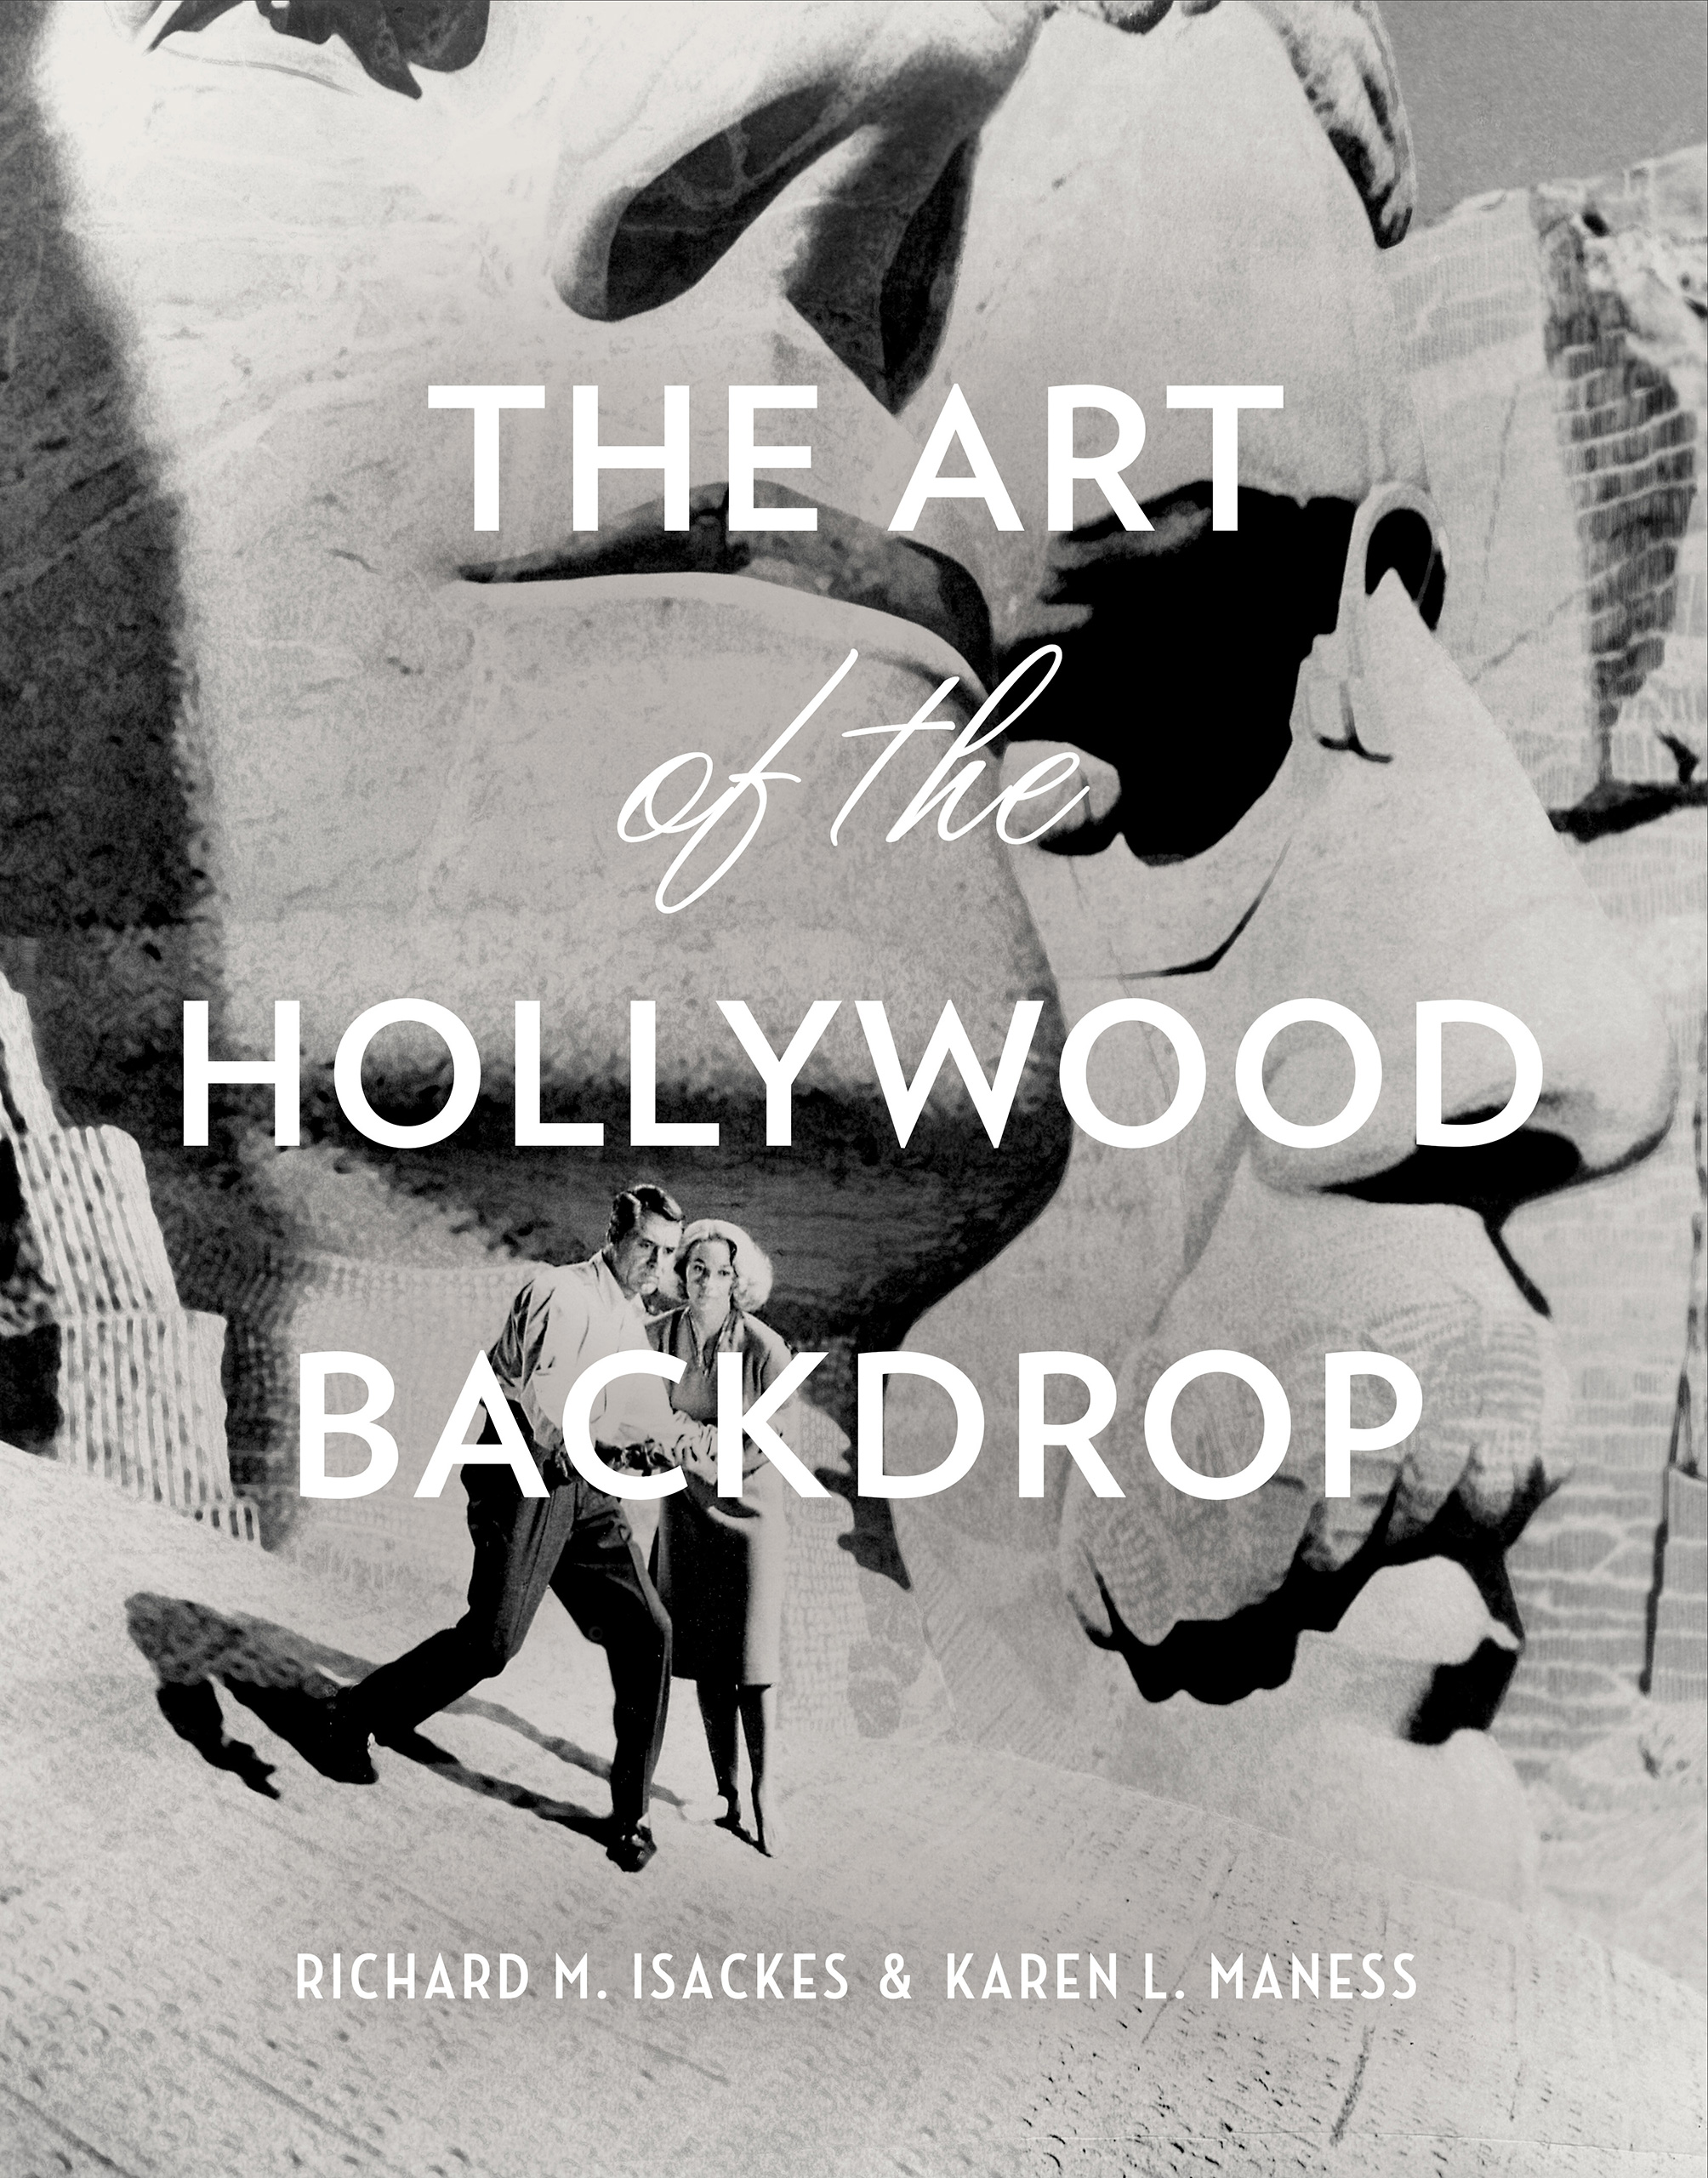 The Art of the Hollywood Backdrop book cover.